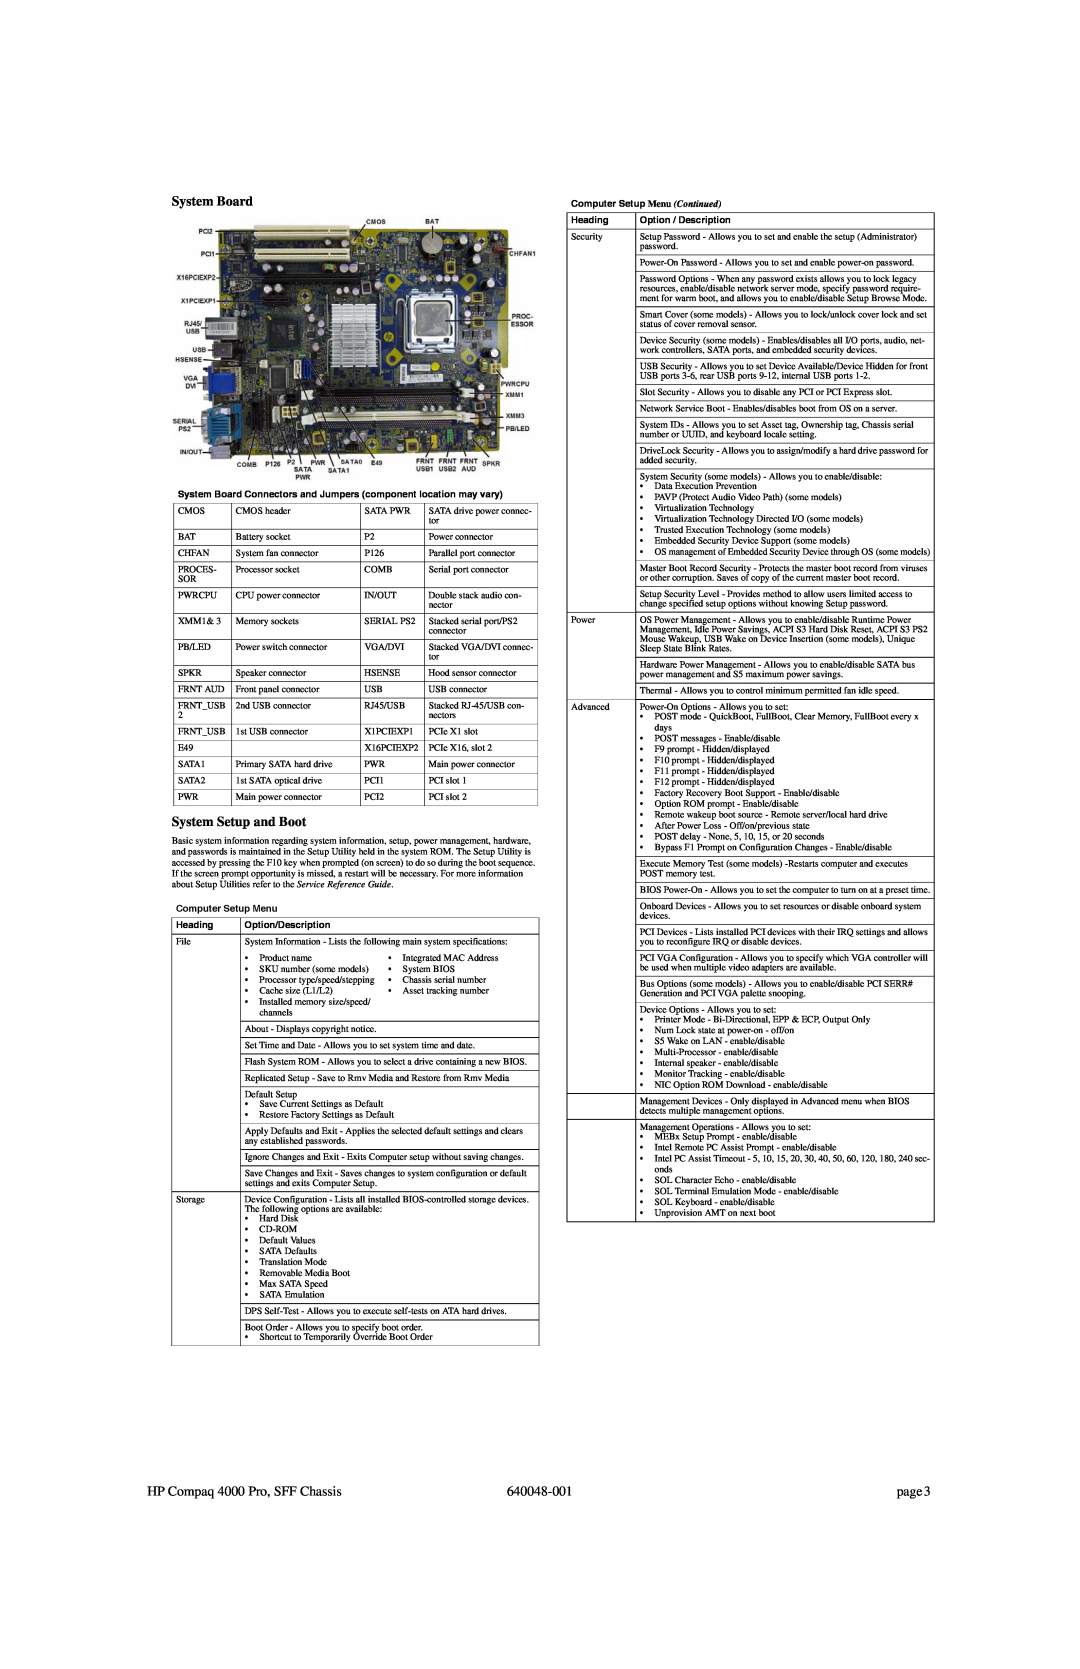 HP manual System Board, System Setup and Boot, HP Compaq 4000 Pro, SFF Chassis, 640048-001, page 